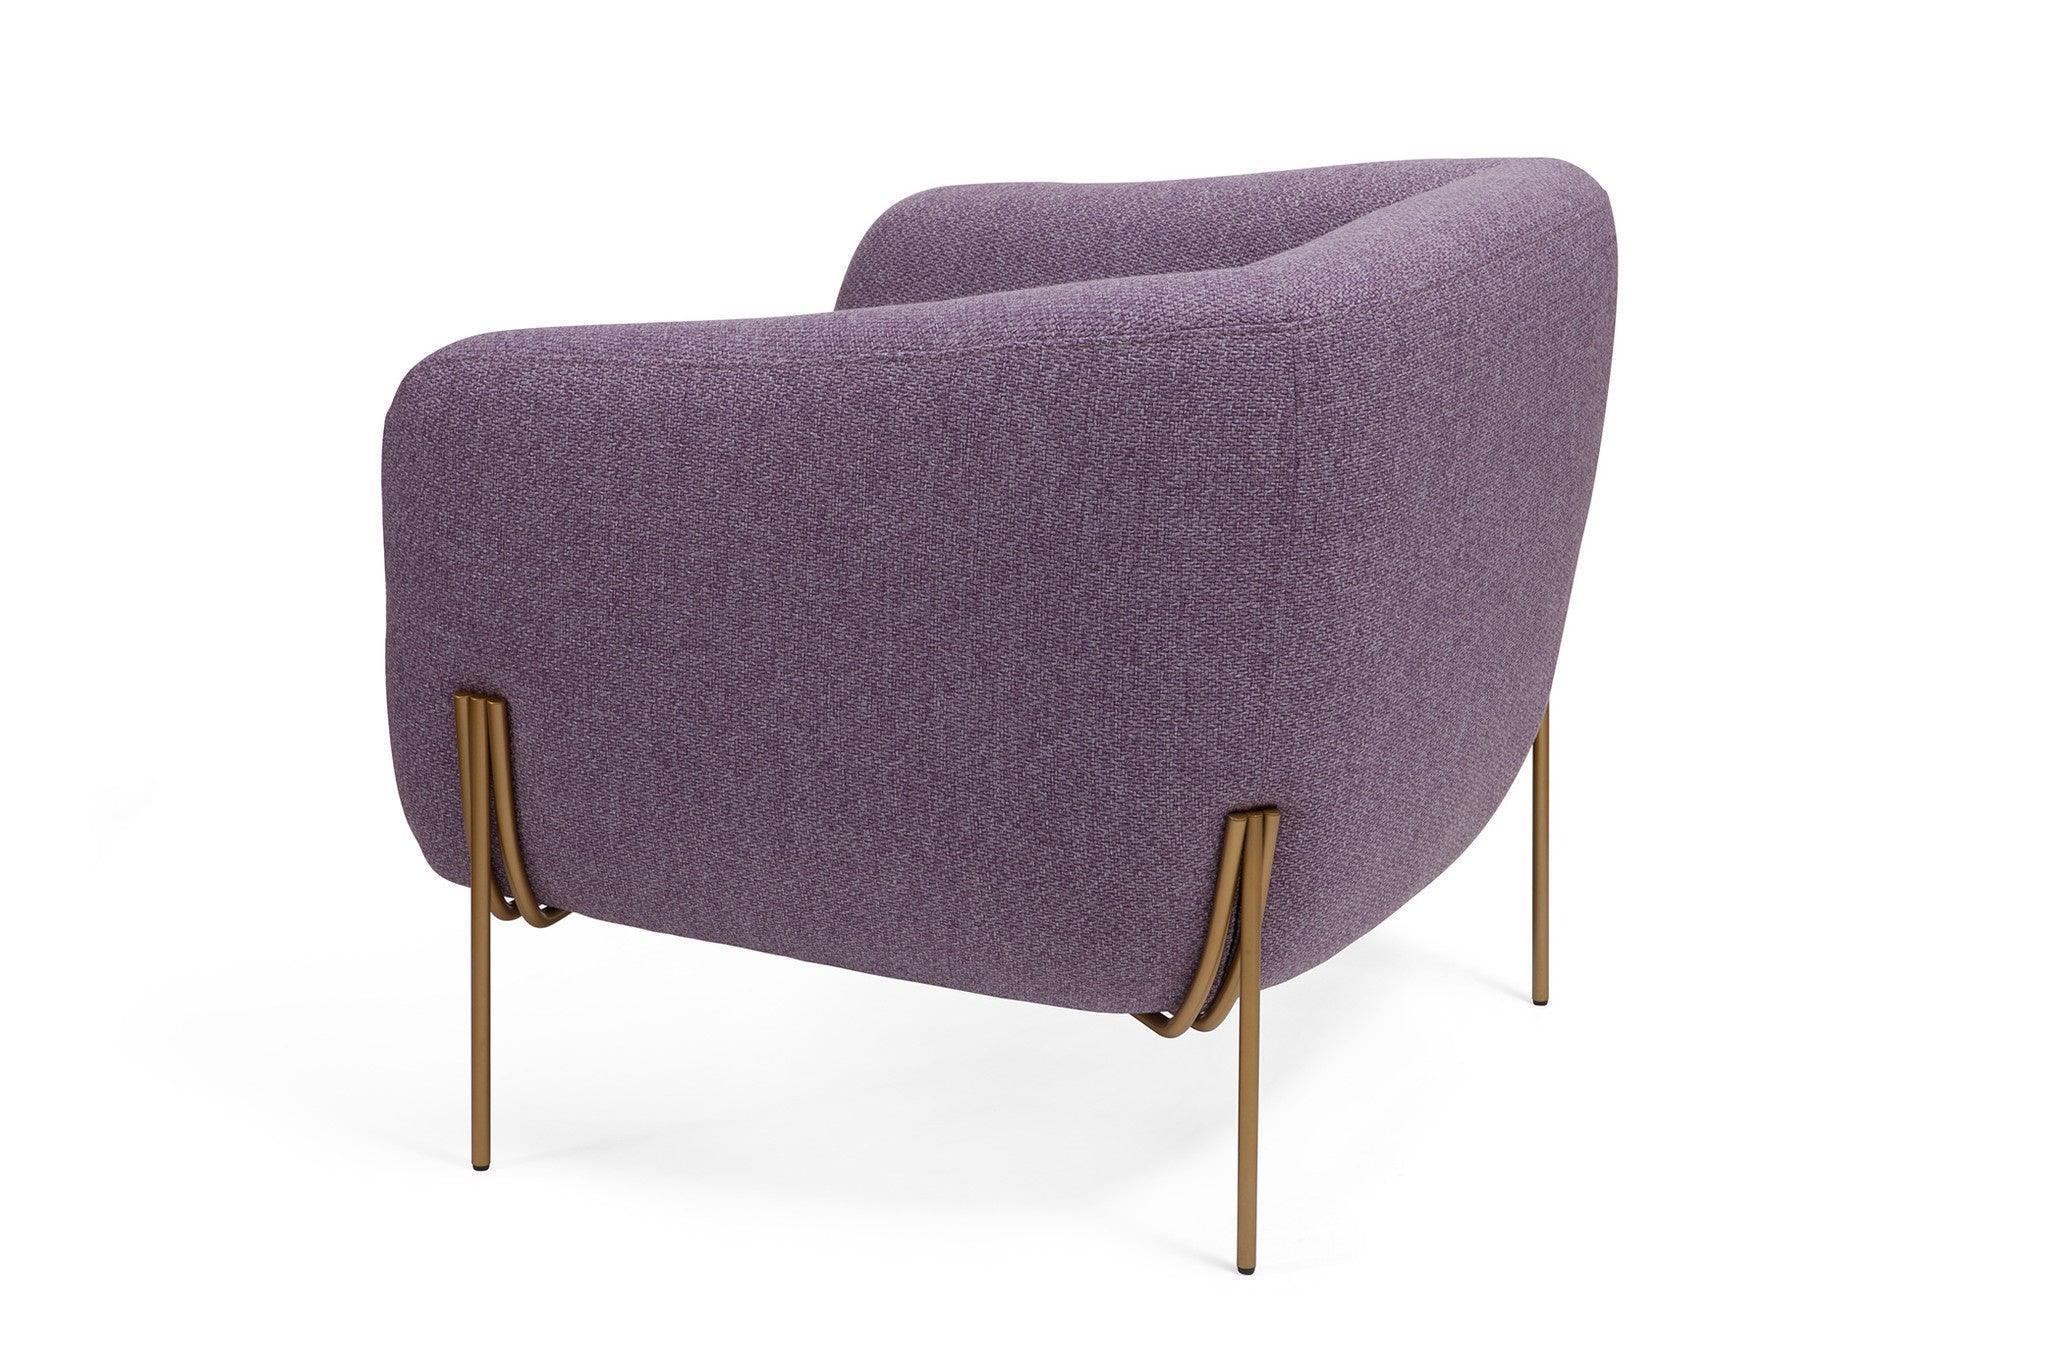 Nara Fauteuil - Violet Daisy - {{ product.type }} - Kas20